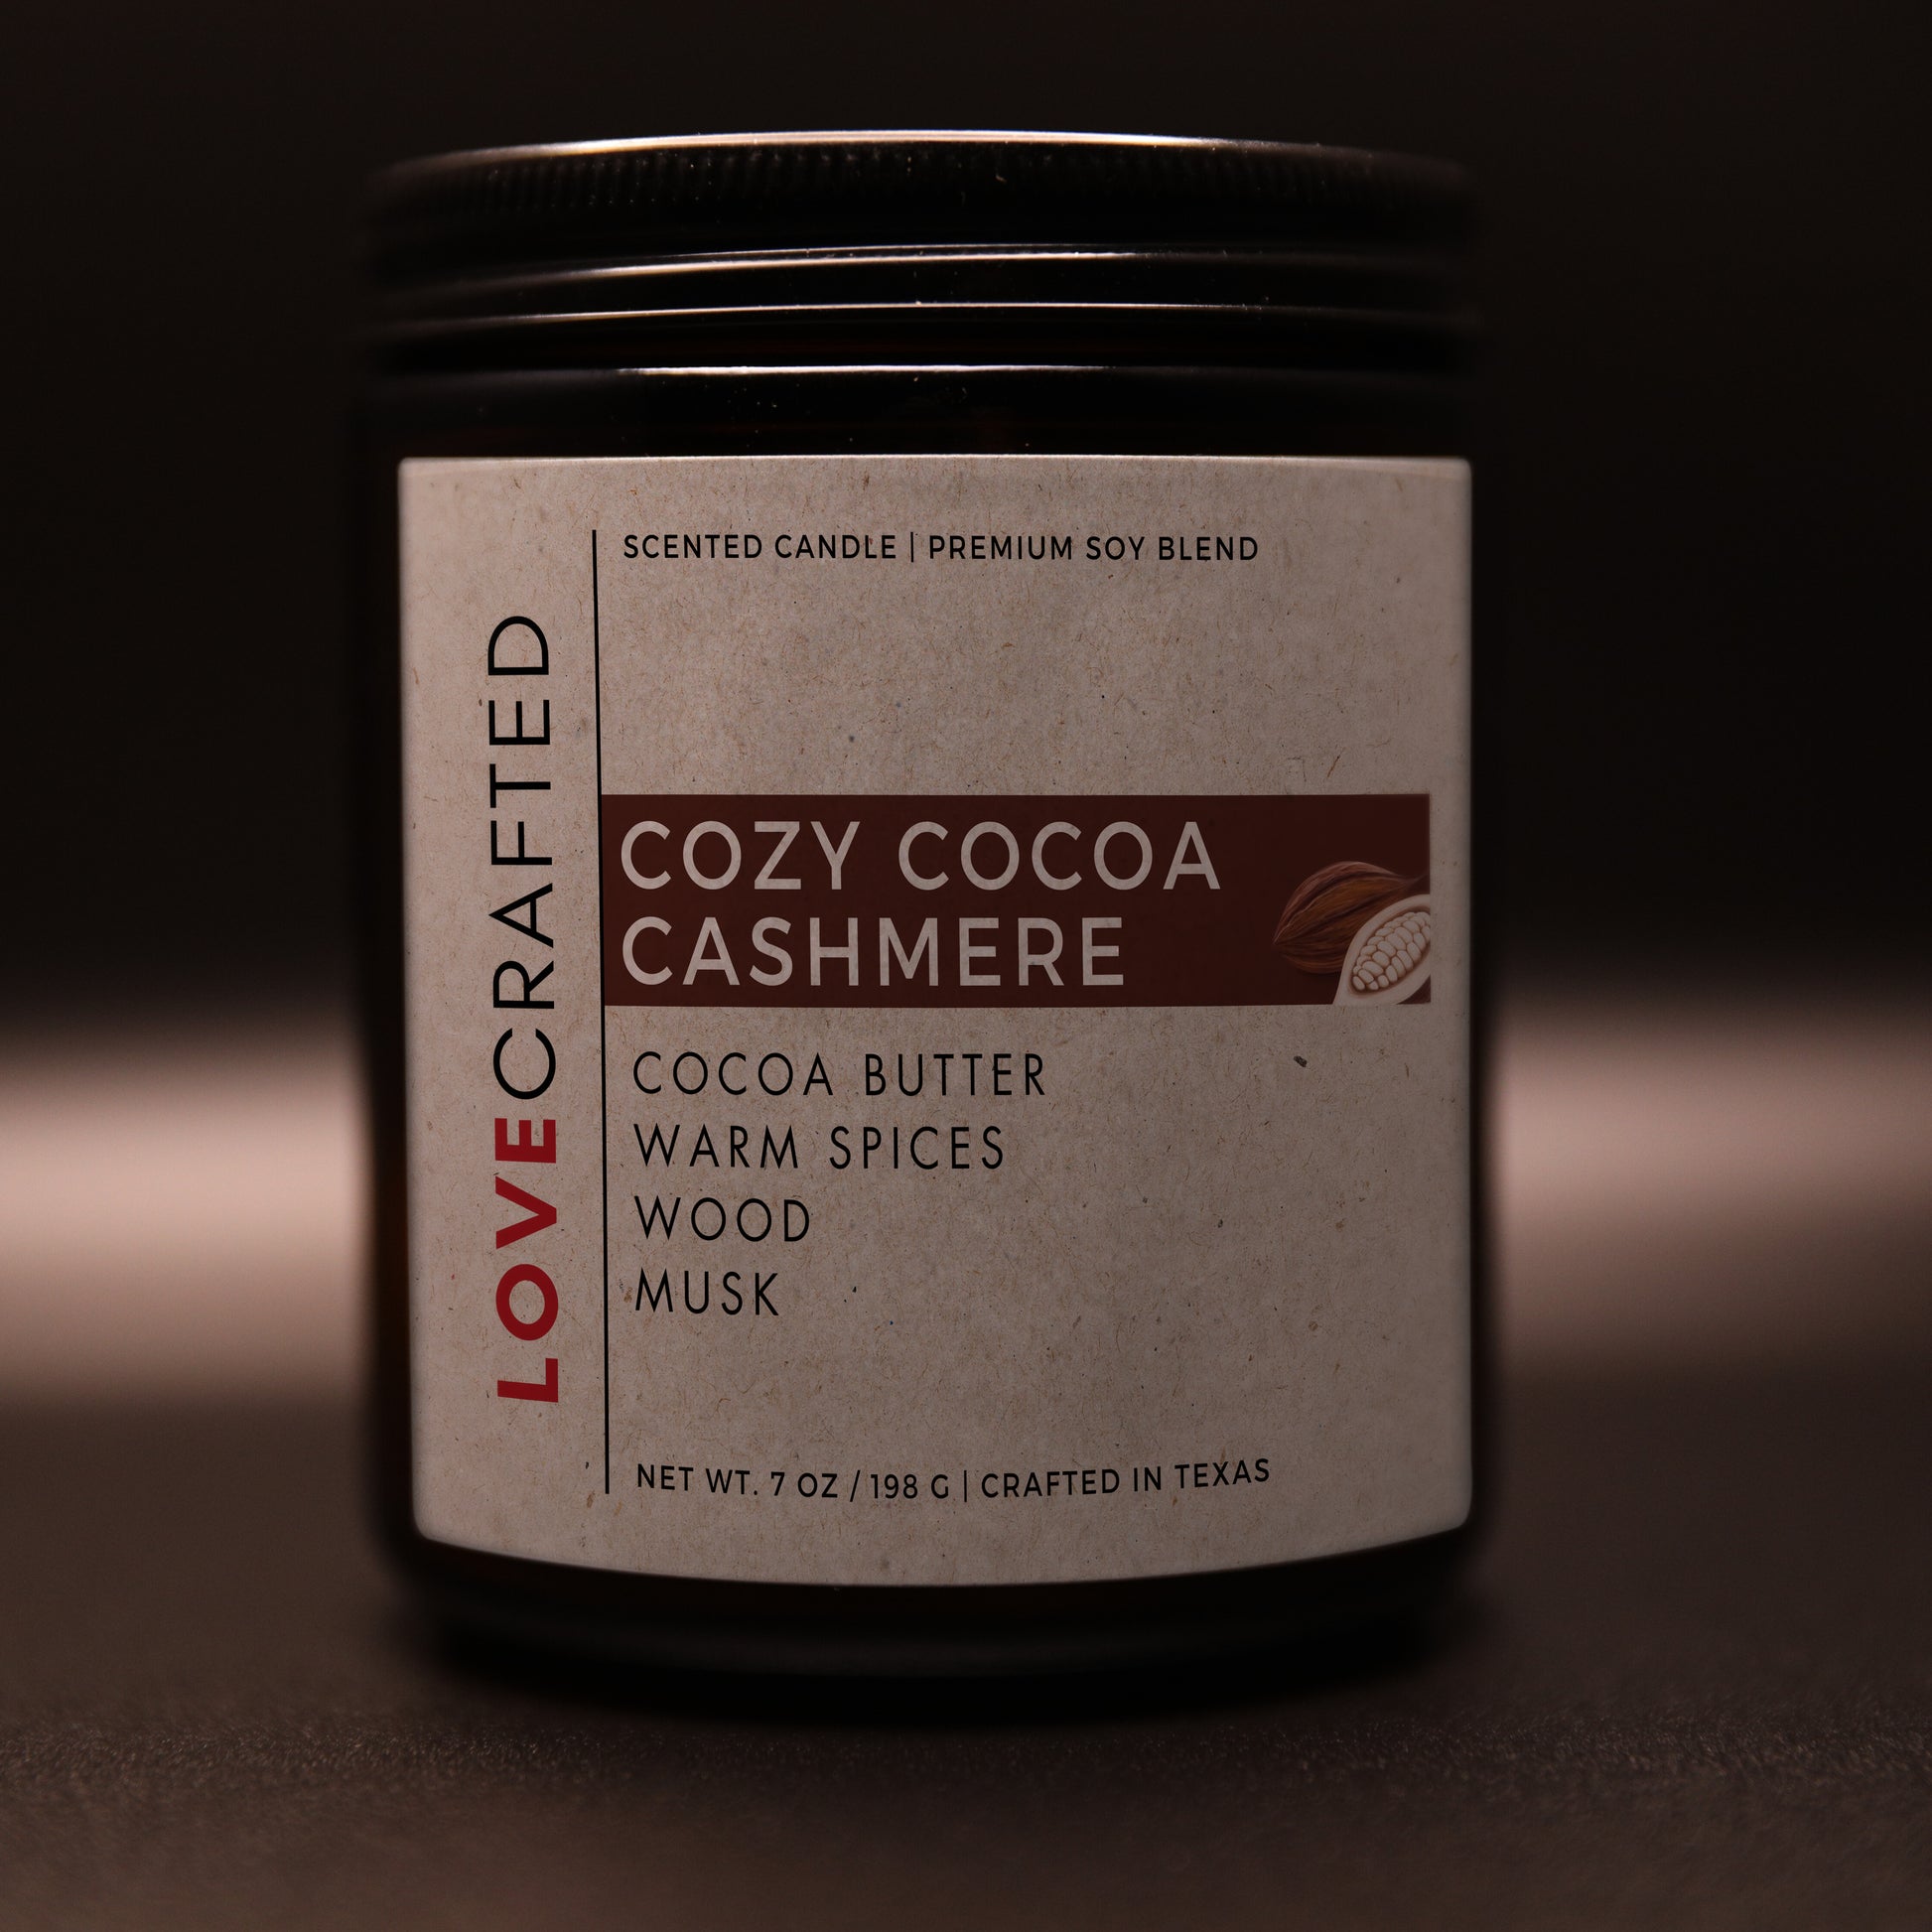 Cozy Cocoa Cashmere, a Fresh and Clean Musky Lovecrafted Candle